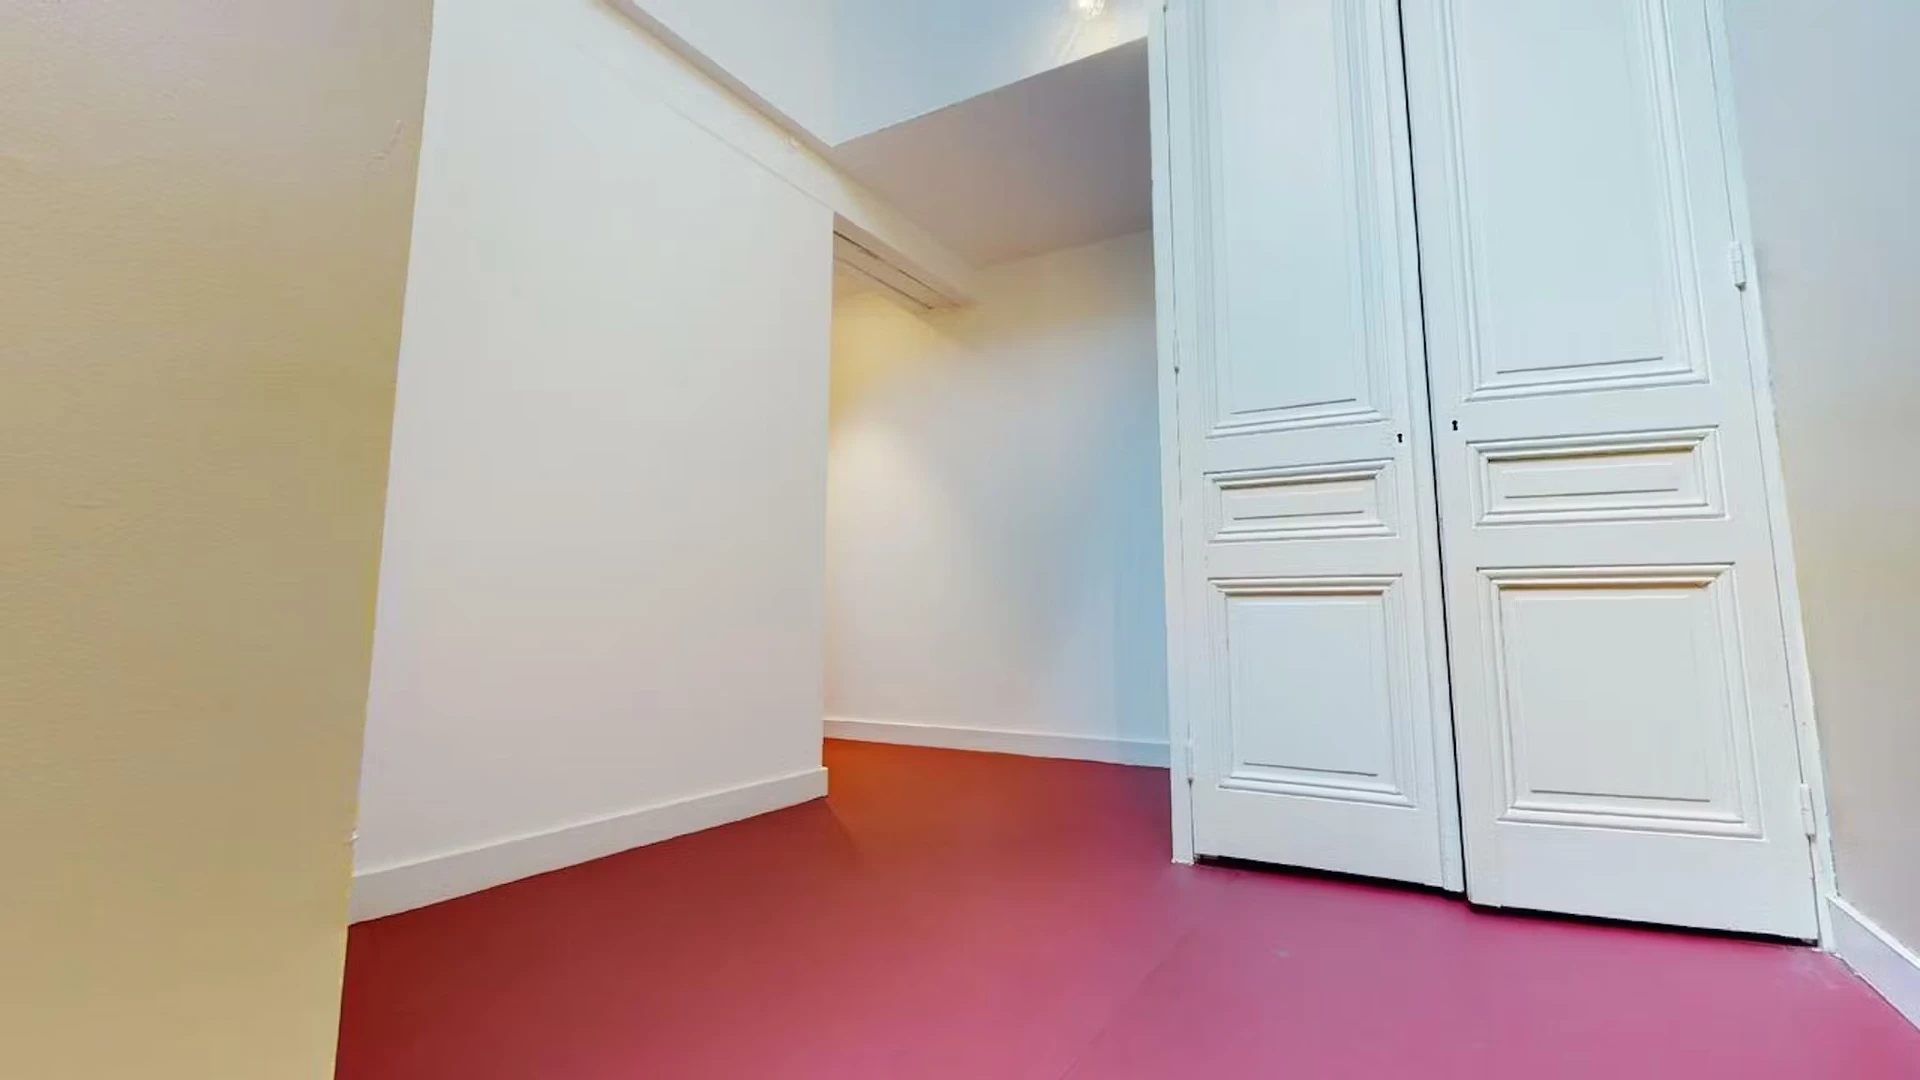 Renting rooms by the month in Saint-étienne